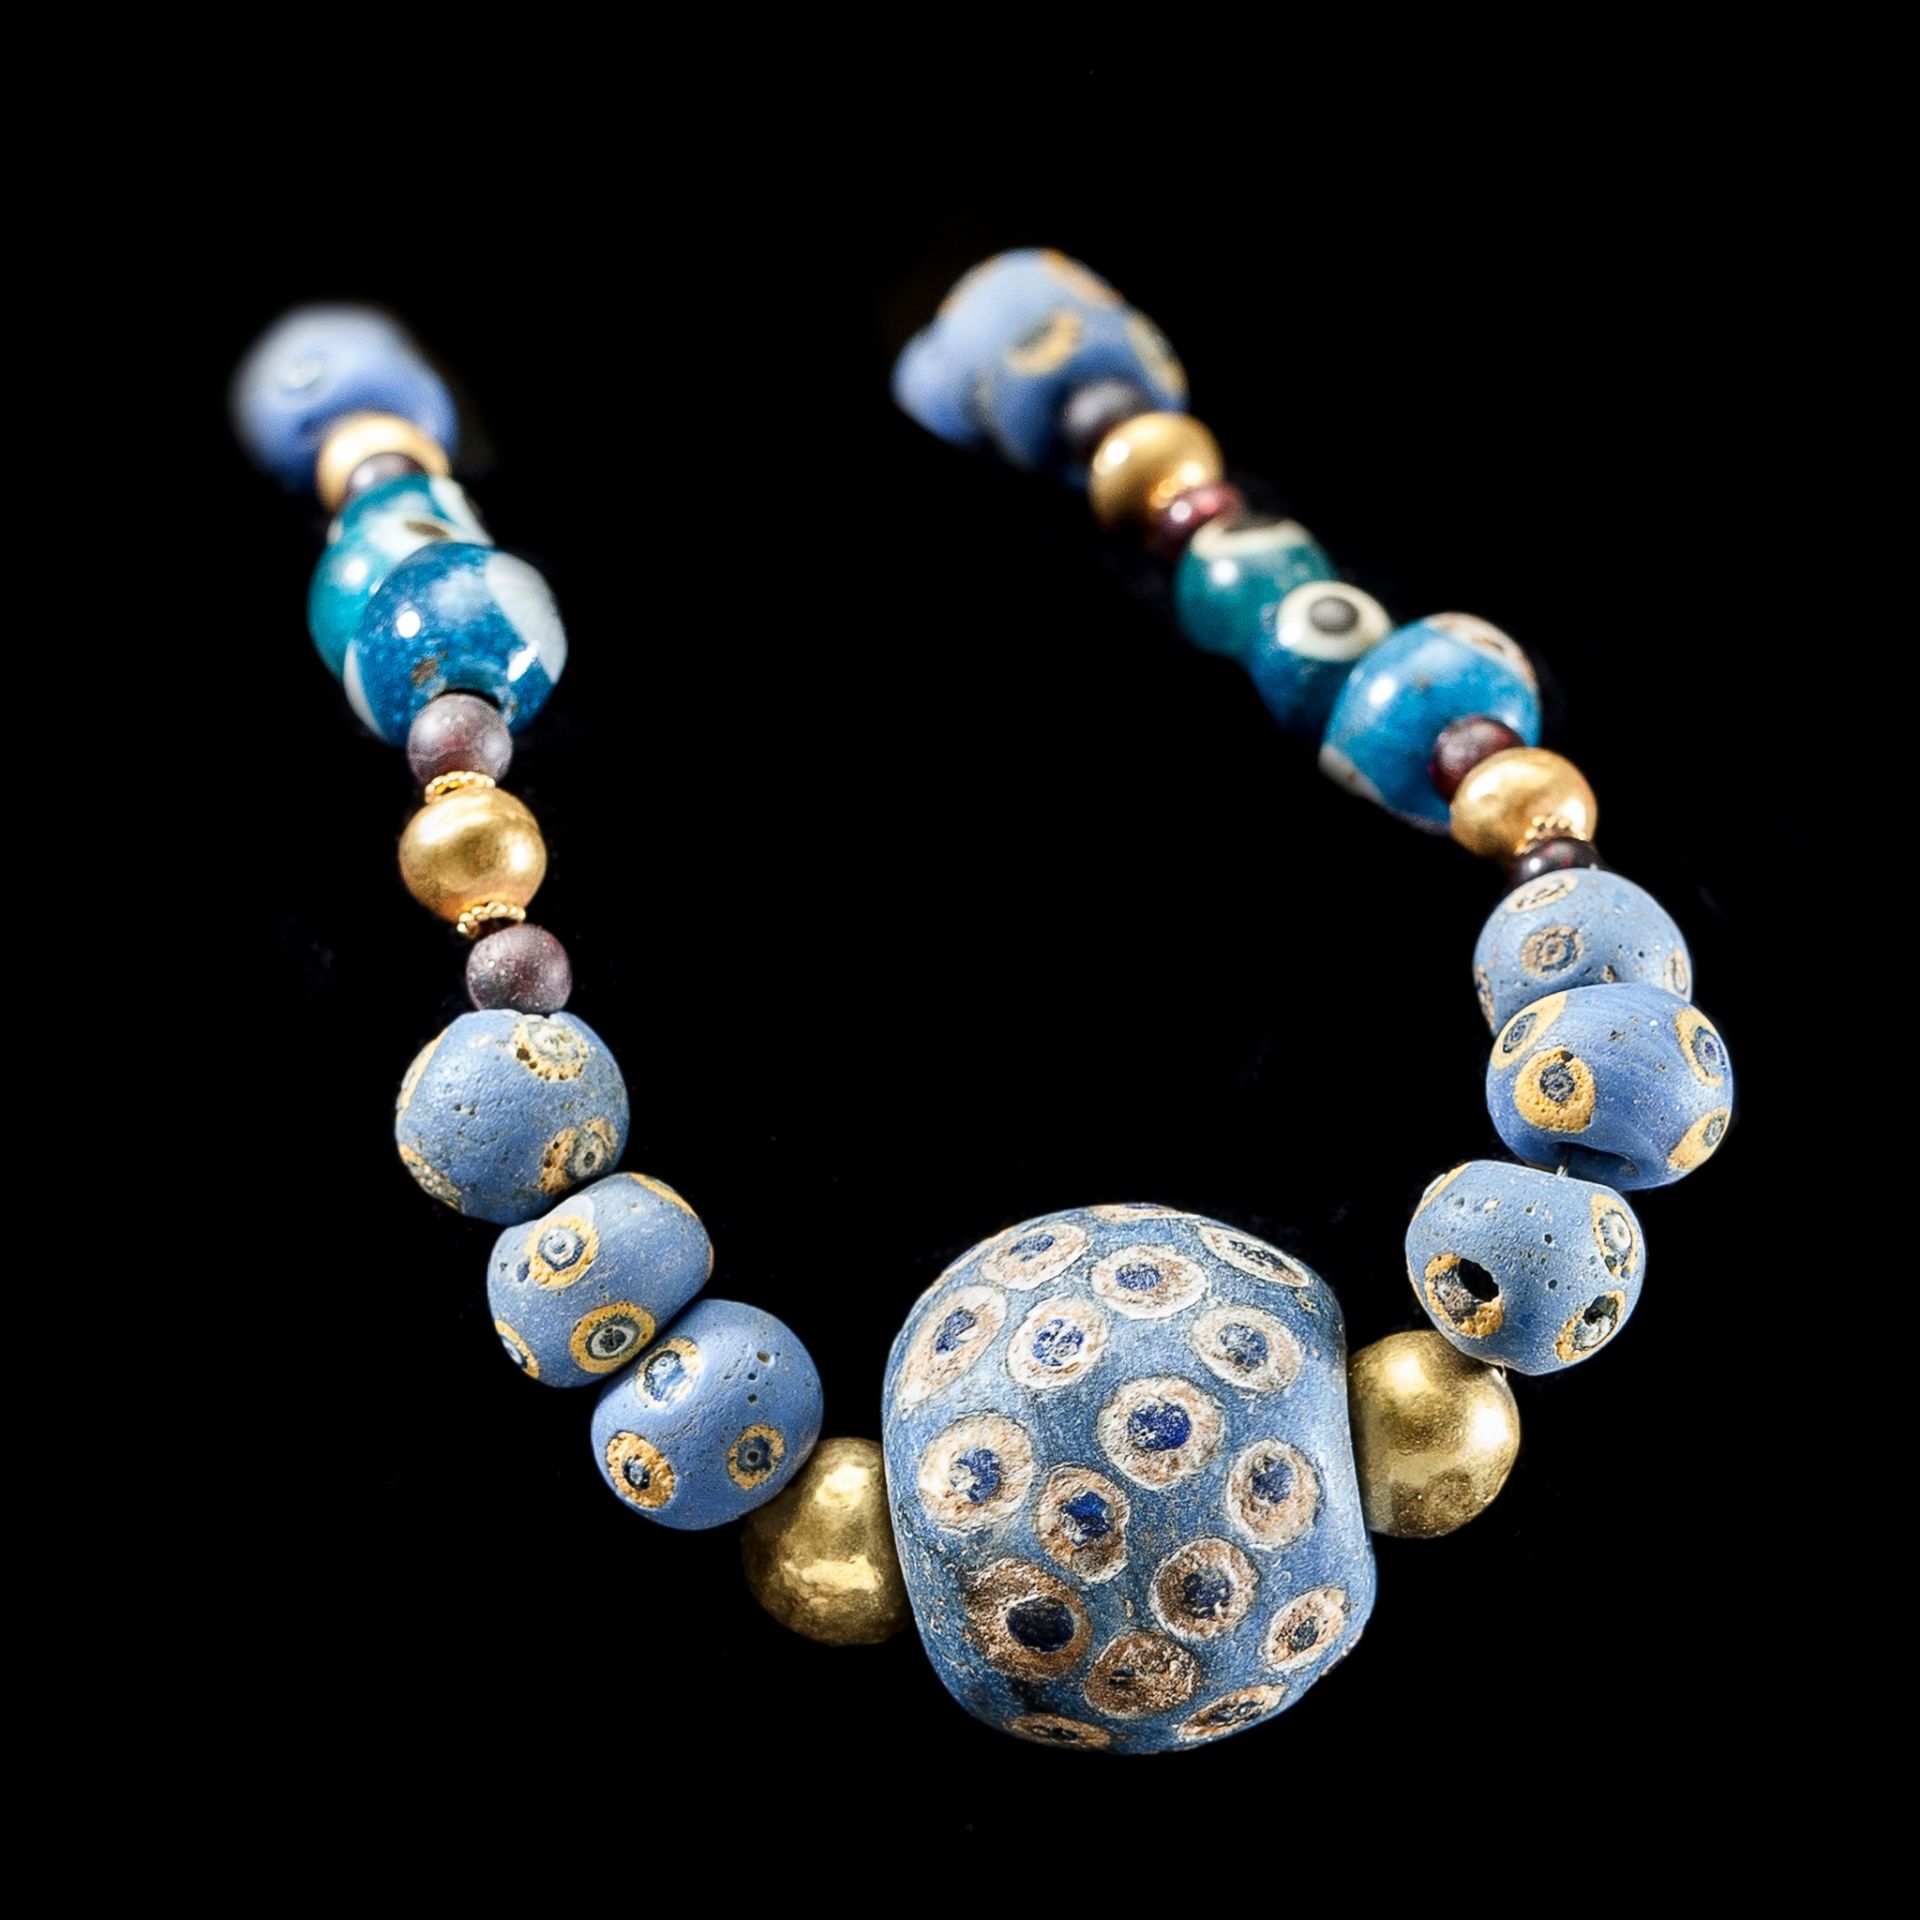 PHOENICIAN EYE GLASS AND GOLD BEAD NECKLACE NEAR EAST, C. 7TH CENTURY B.C. - Image 2 of 2